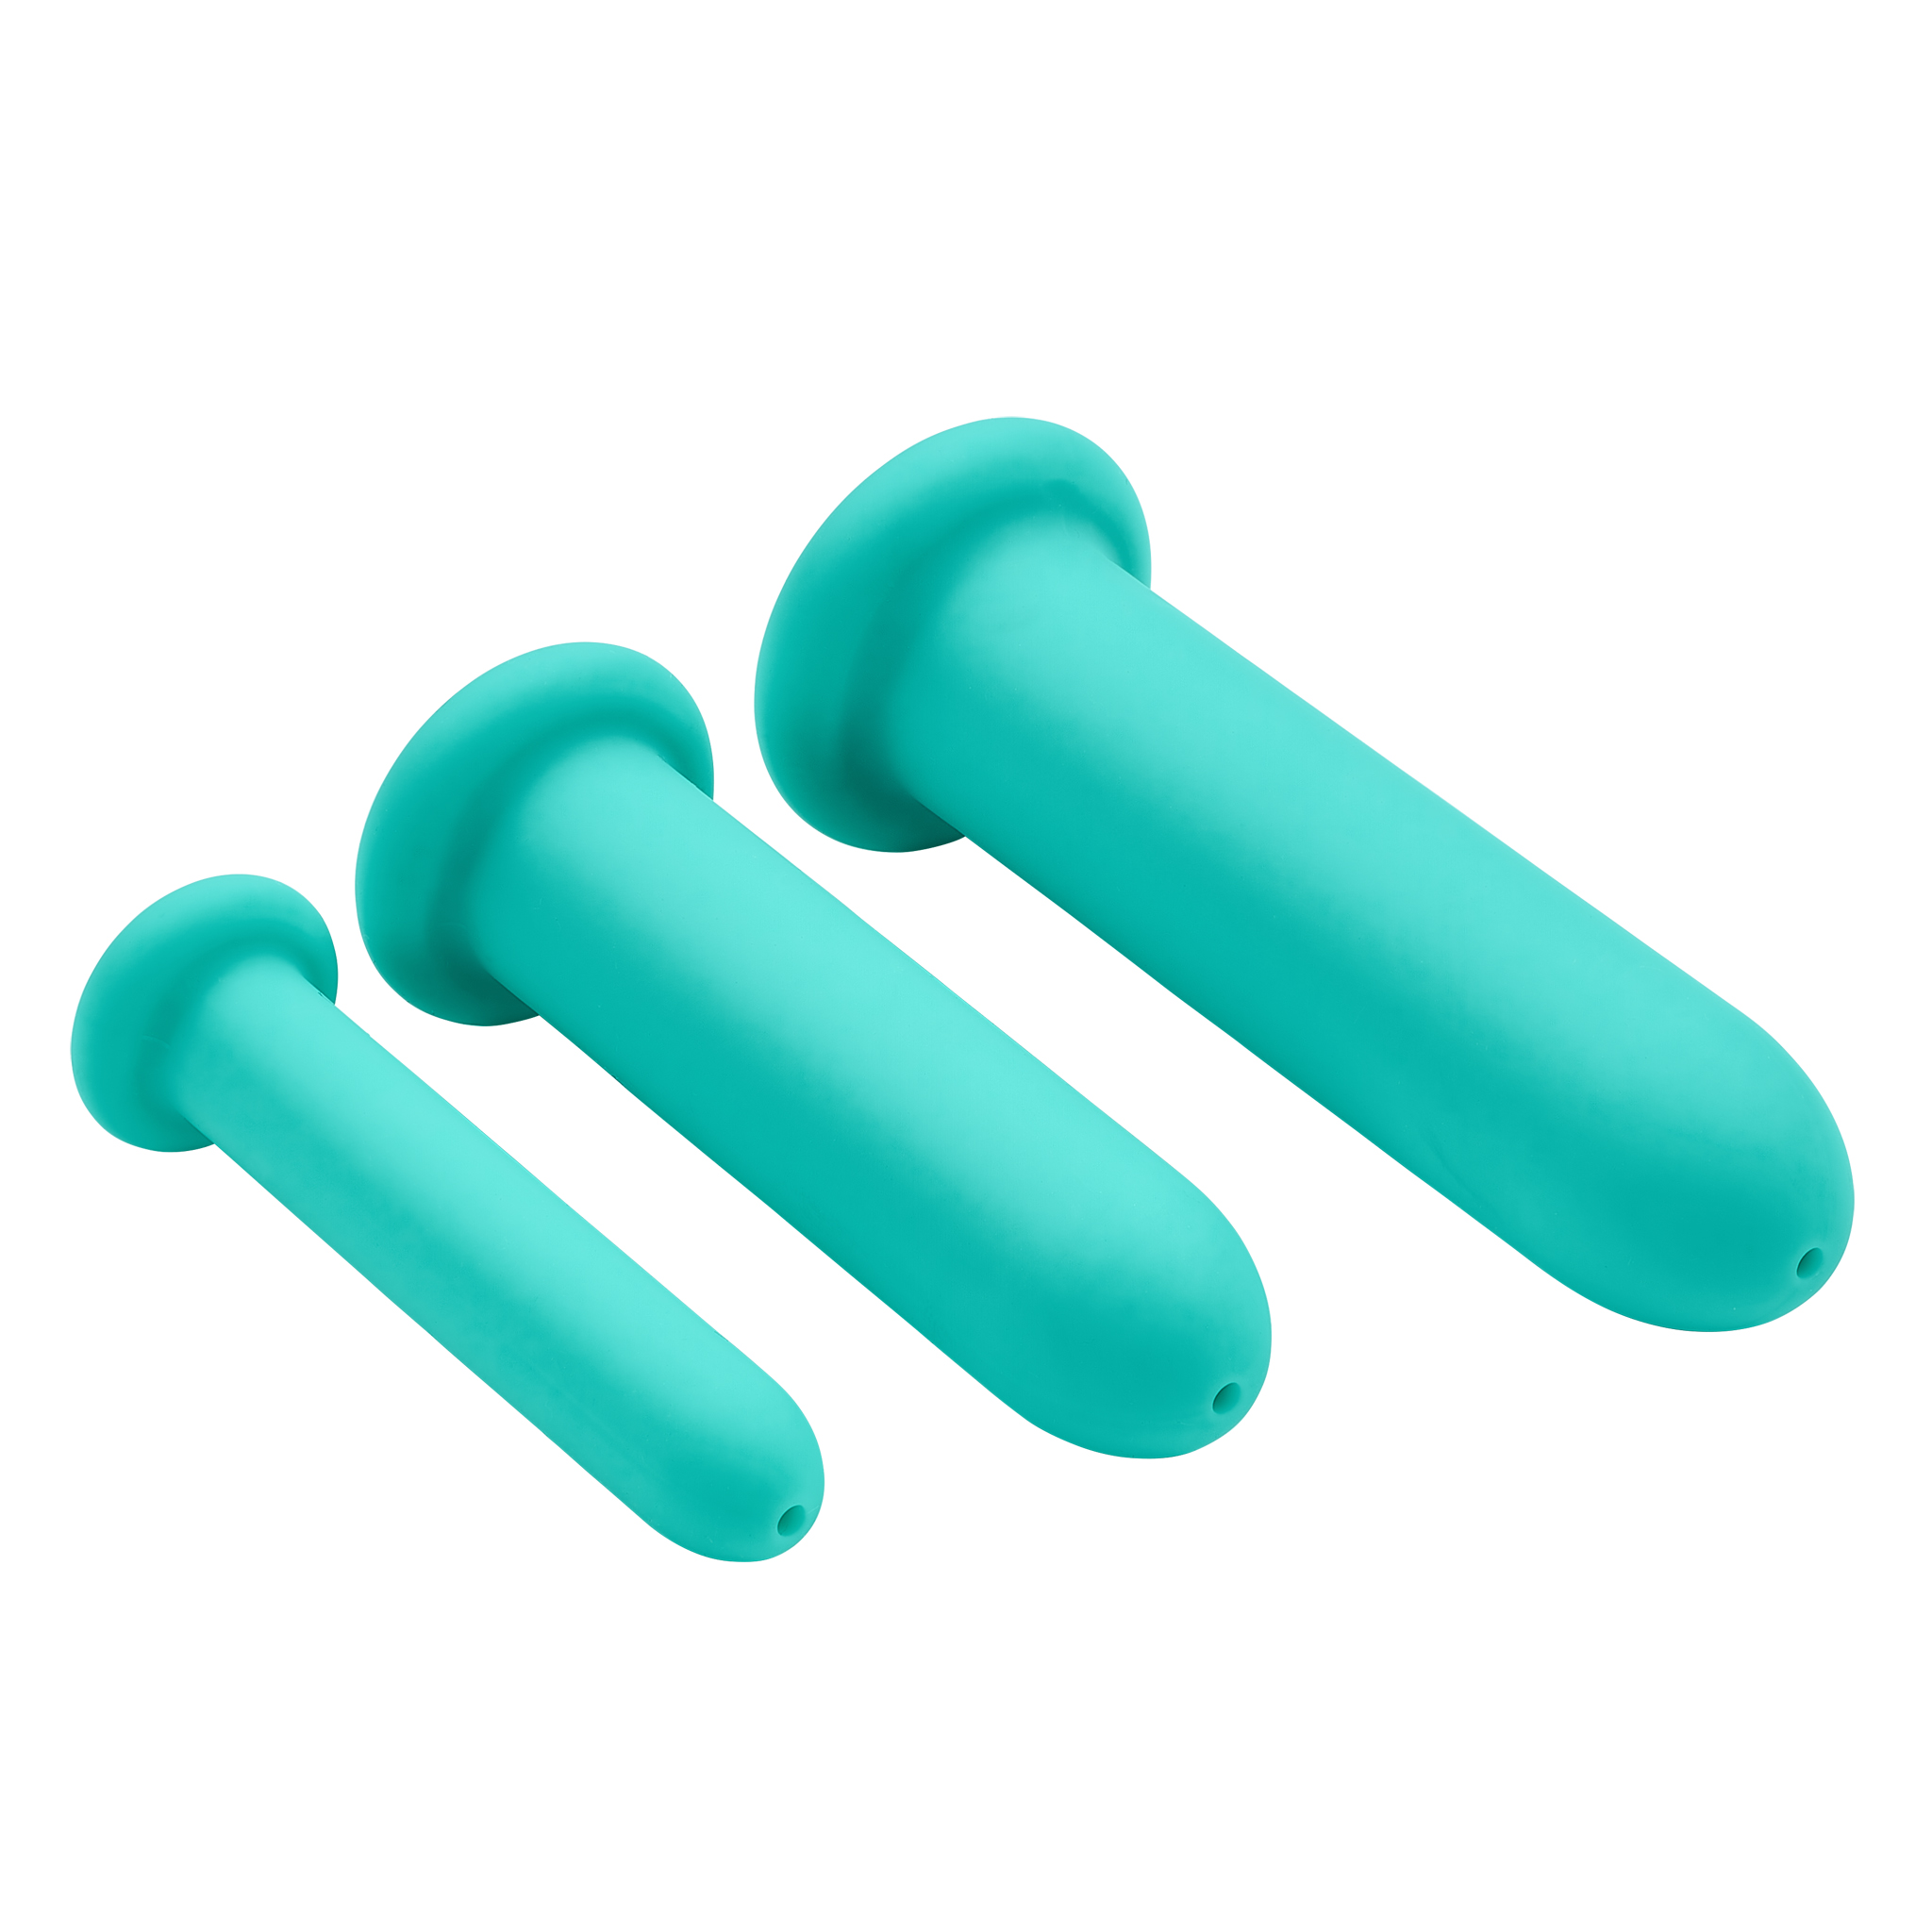 CLOUD 9 HEALTH & WELLNESS SILICONE DILATOR KIT (FOR VAGINAL OR ANAL USE) - Click Image to Close